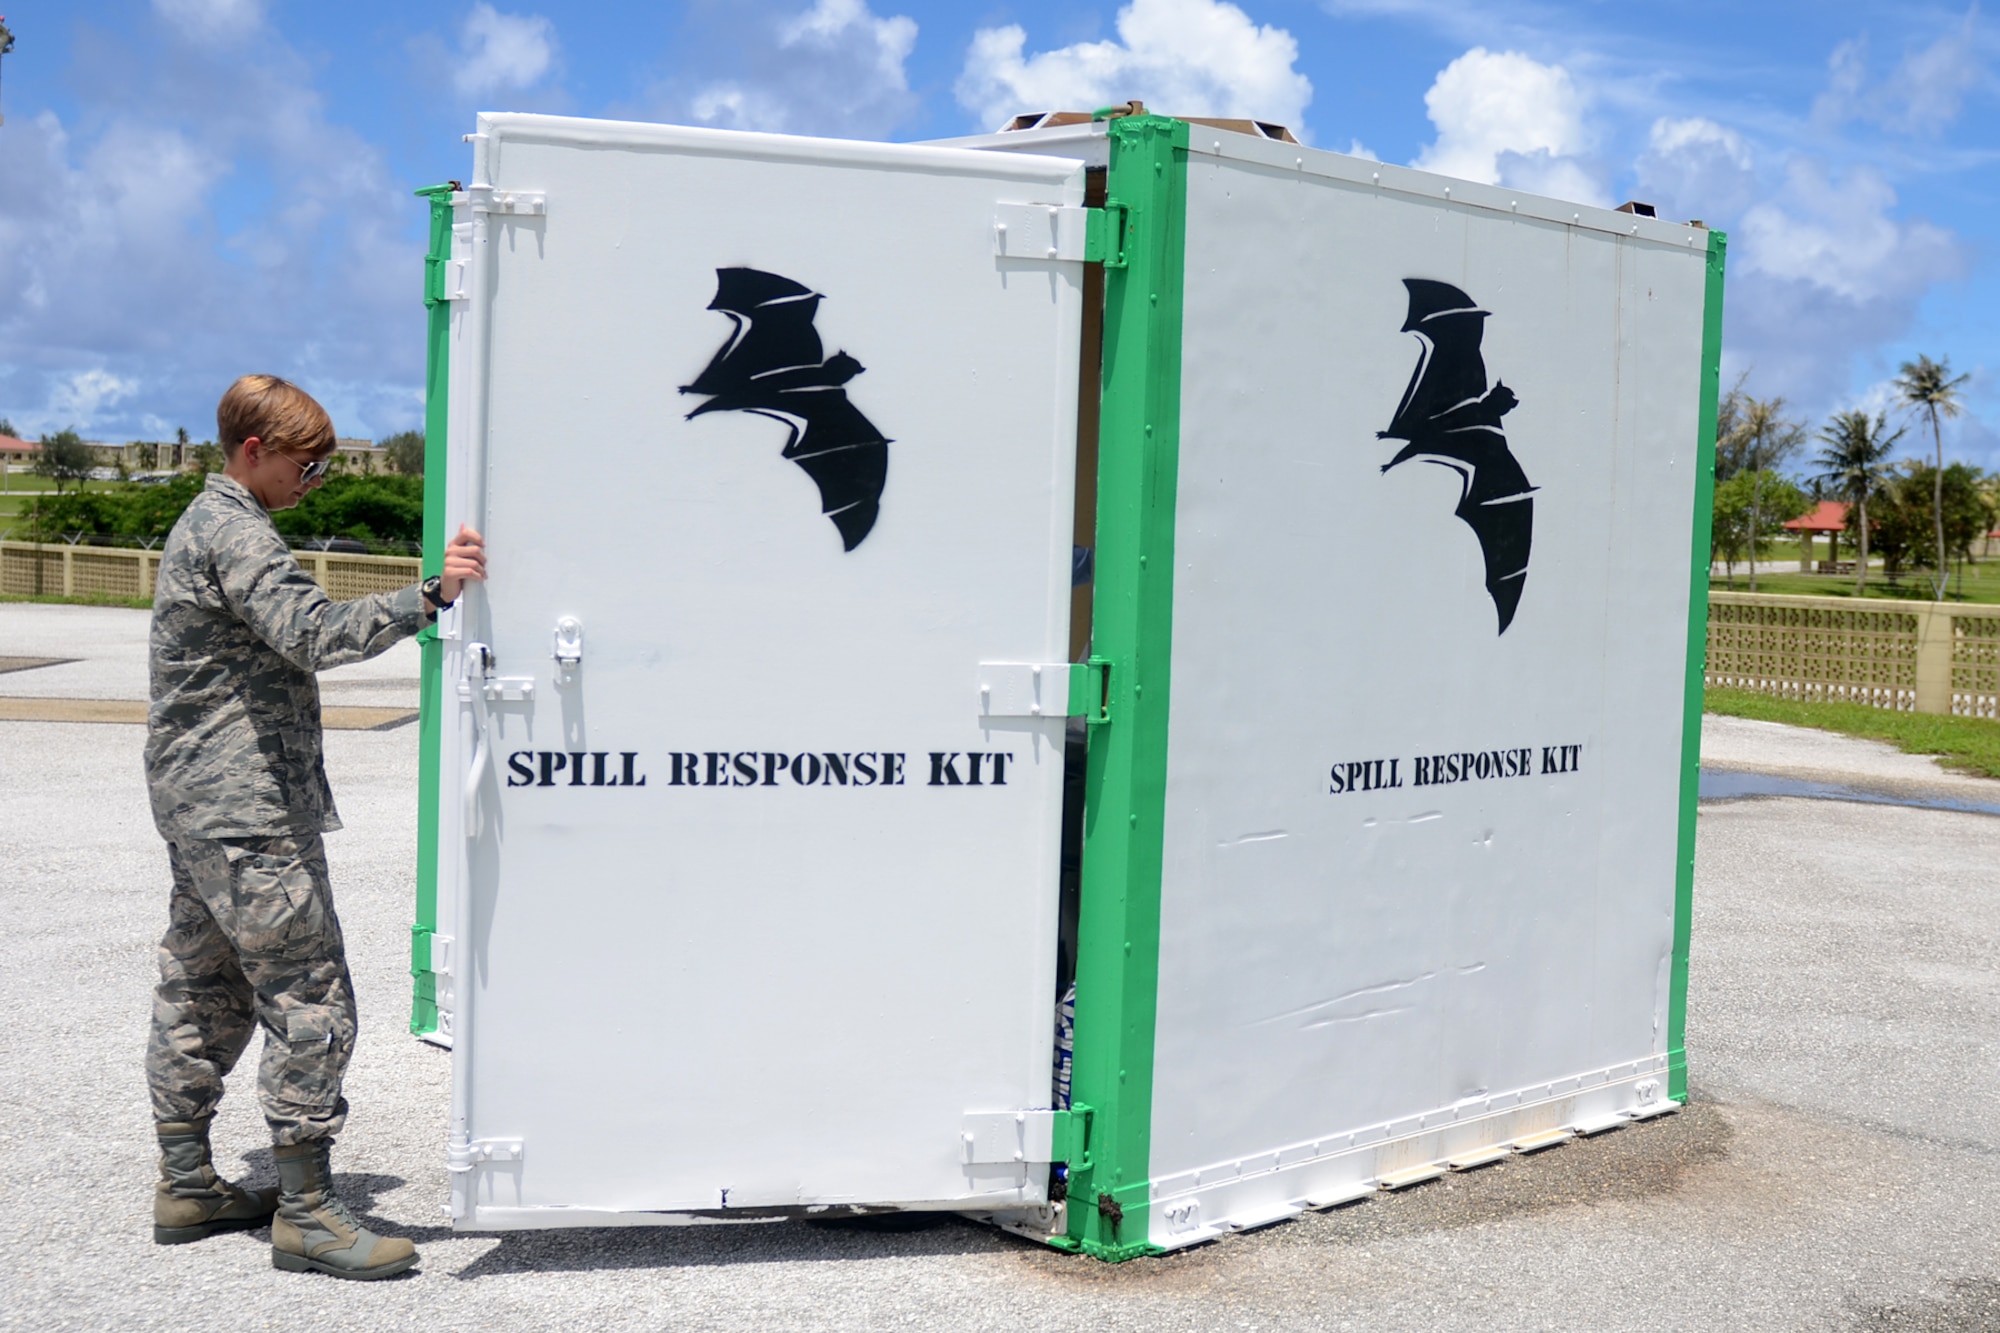 2nd Lt. Cari Gandy, 36th Civil Engineer Squadron environmental engineer, surveys the contents of an airfield spill response kit July 22, 2015, at Andersen Air Force Base, Guam. The kits were implemented as an effort to maintain fuel spills in a quick and convenient manner until dedicated response teams arrive. (U.S. Air Force photo by Airman 1st Class Alexa Ann Henderson/Released)